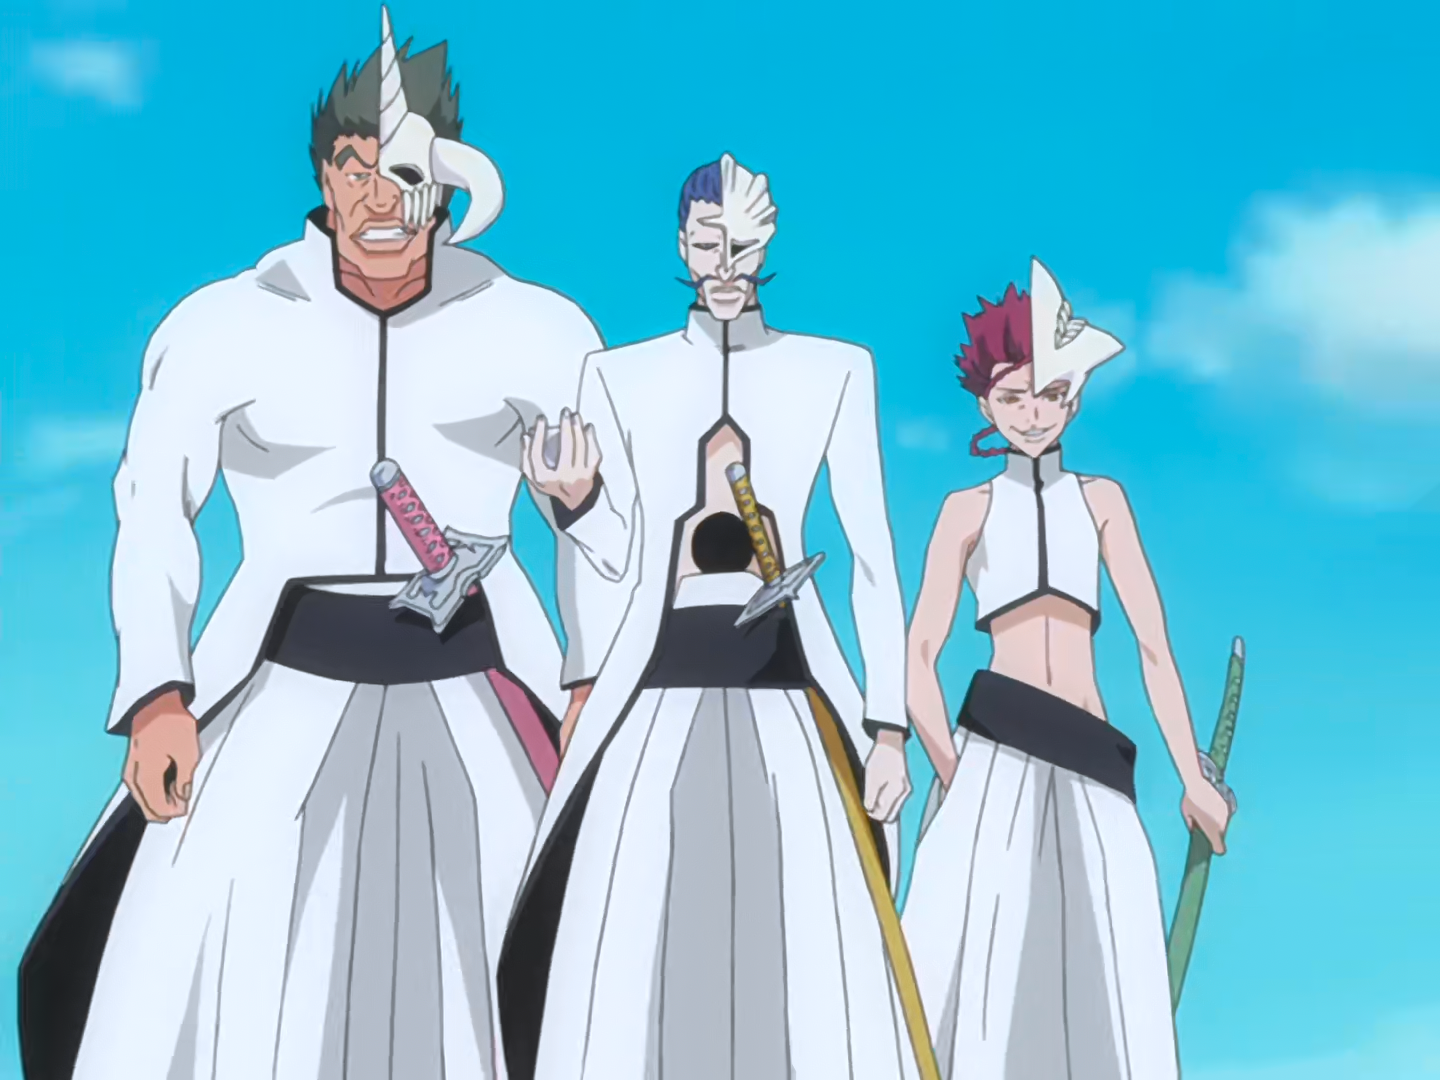 Has Bleach Dropped the Ball For its Fandom?